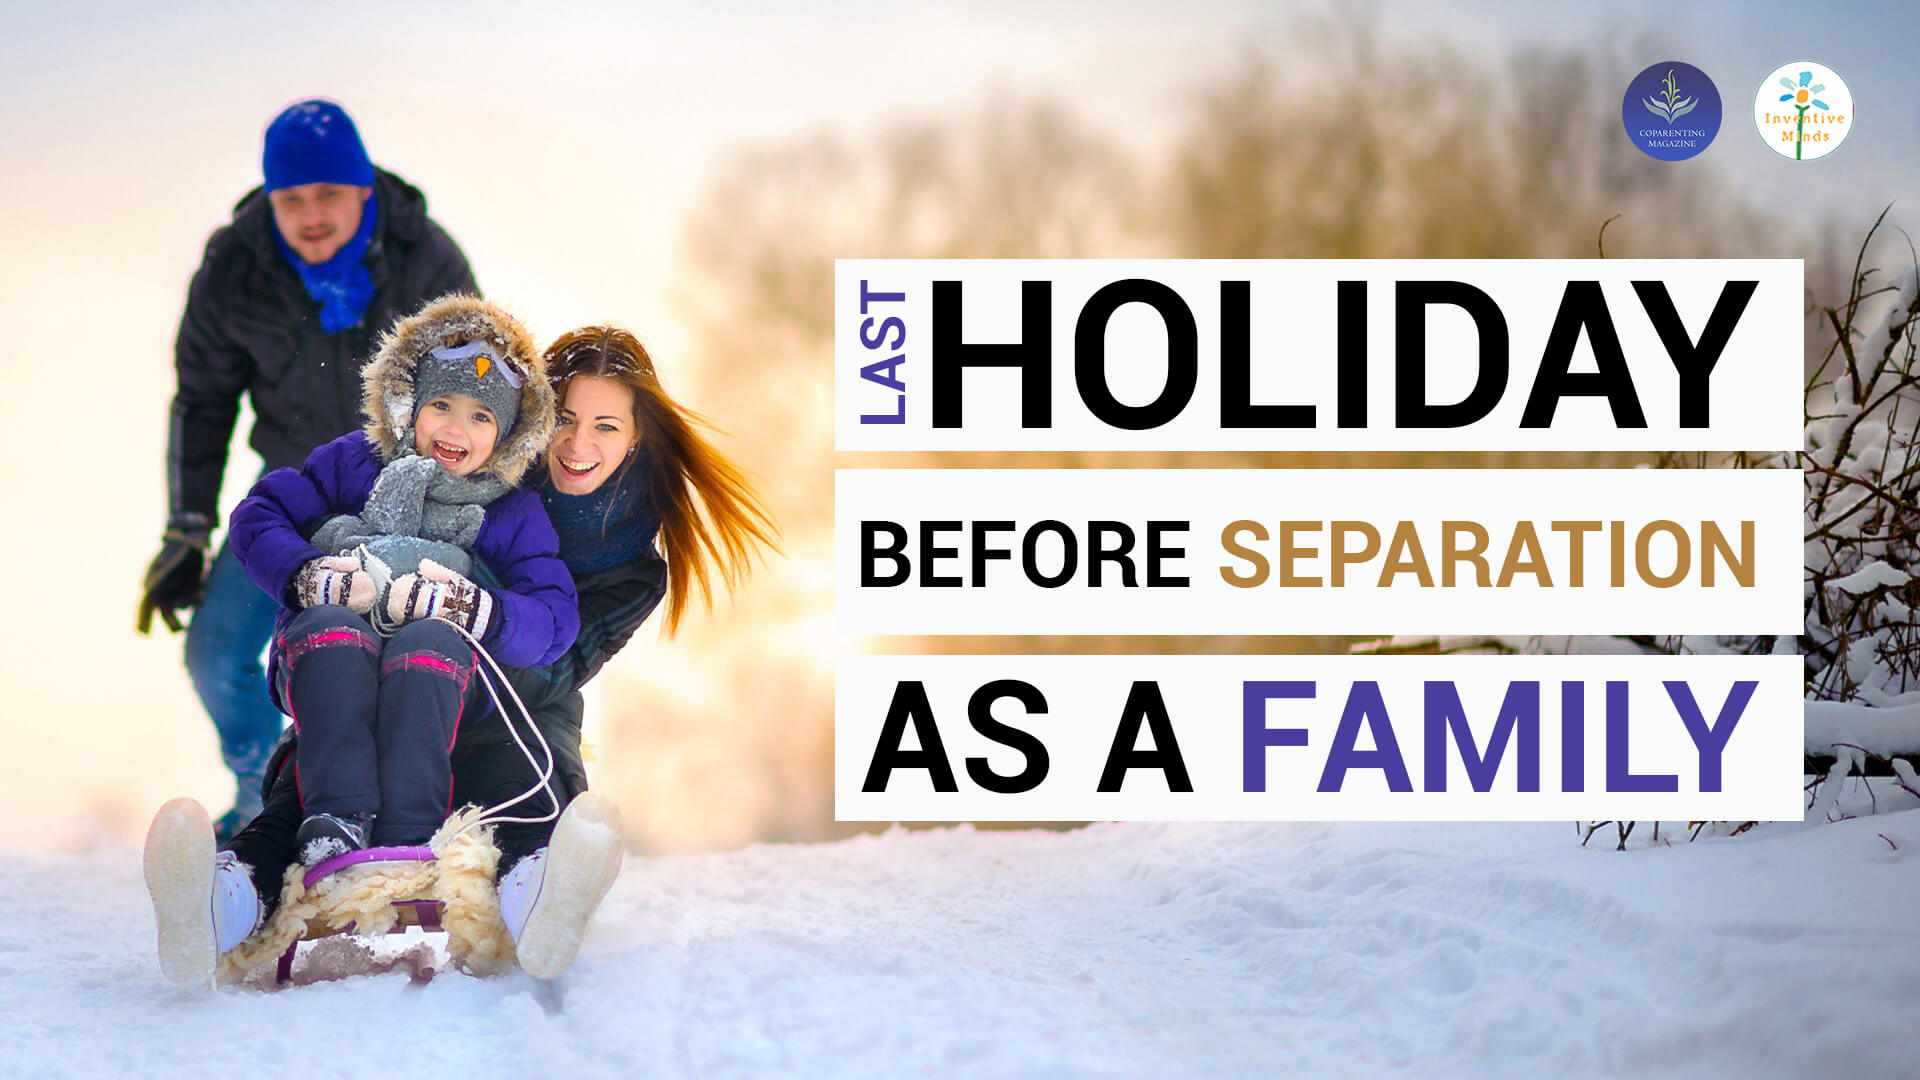 Last Holiday Before Separation As A Family - Dos and Don’ts To Keep The Balance With The Ex!